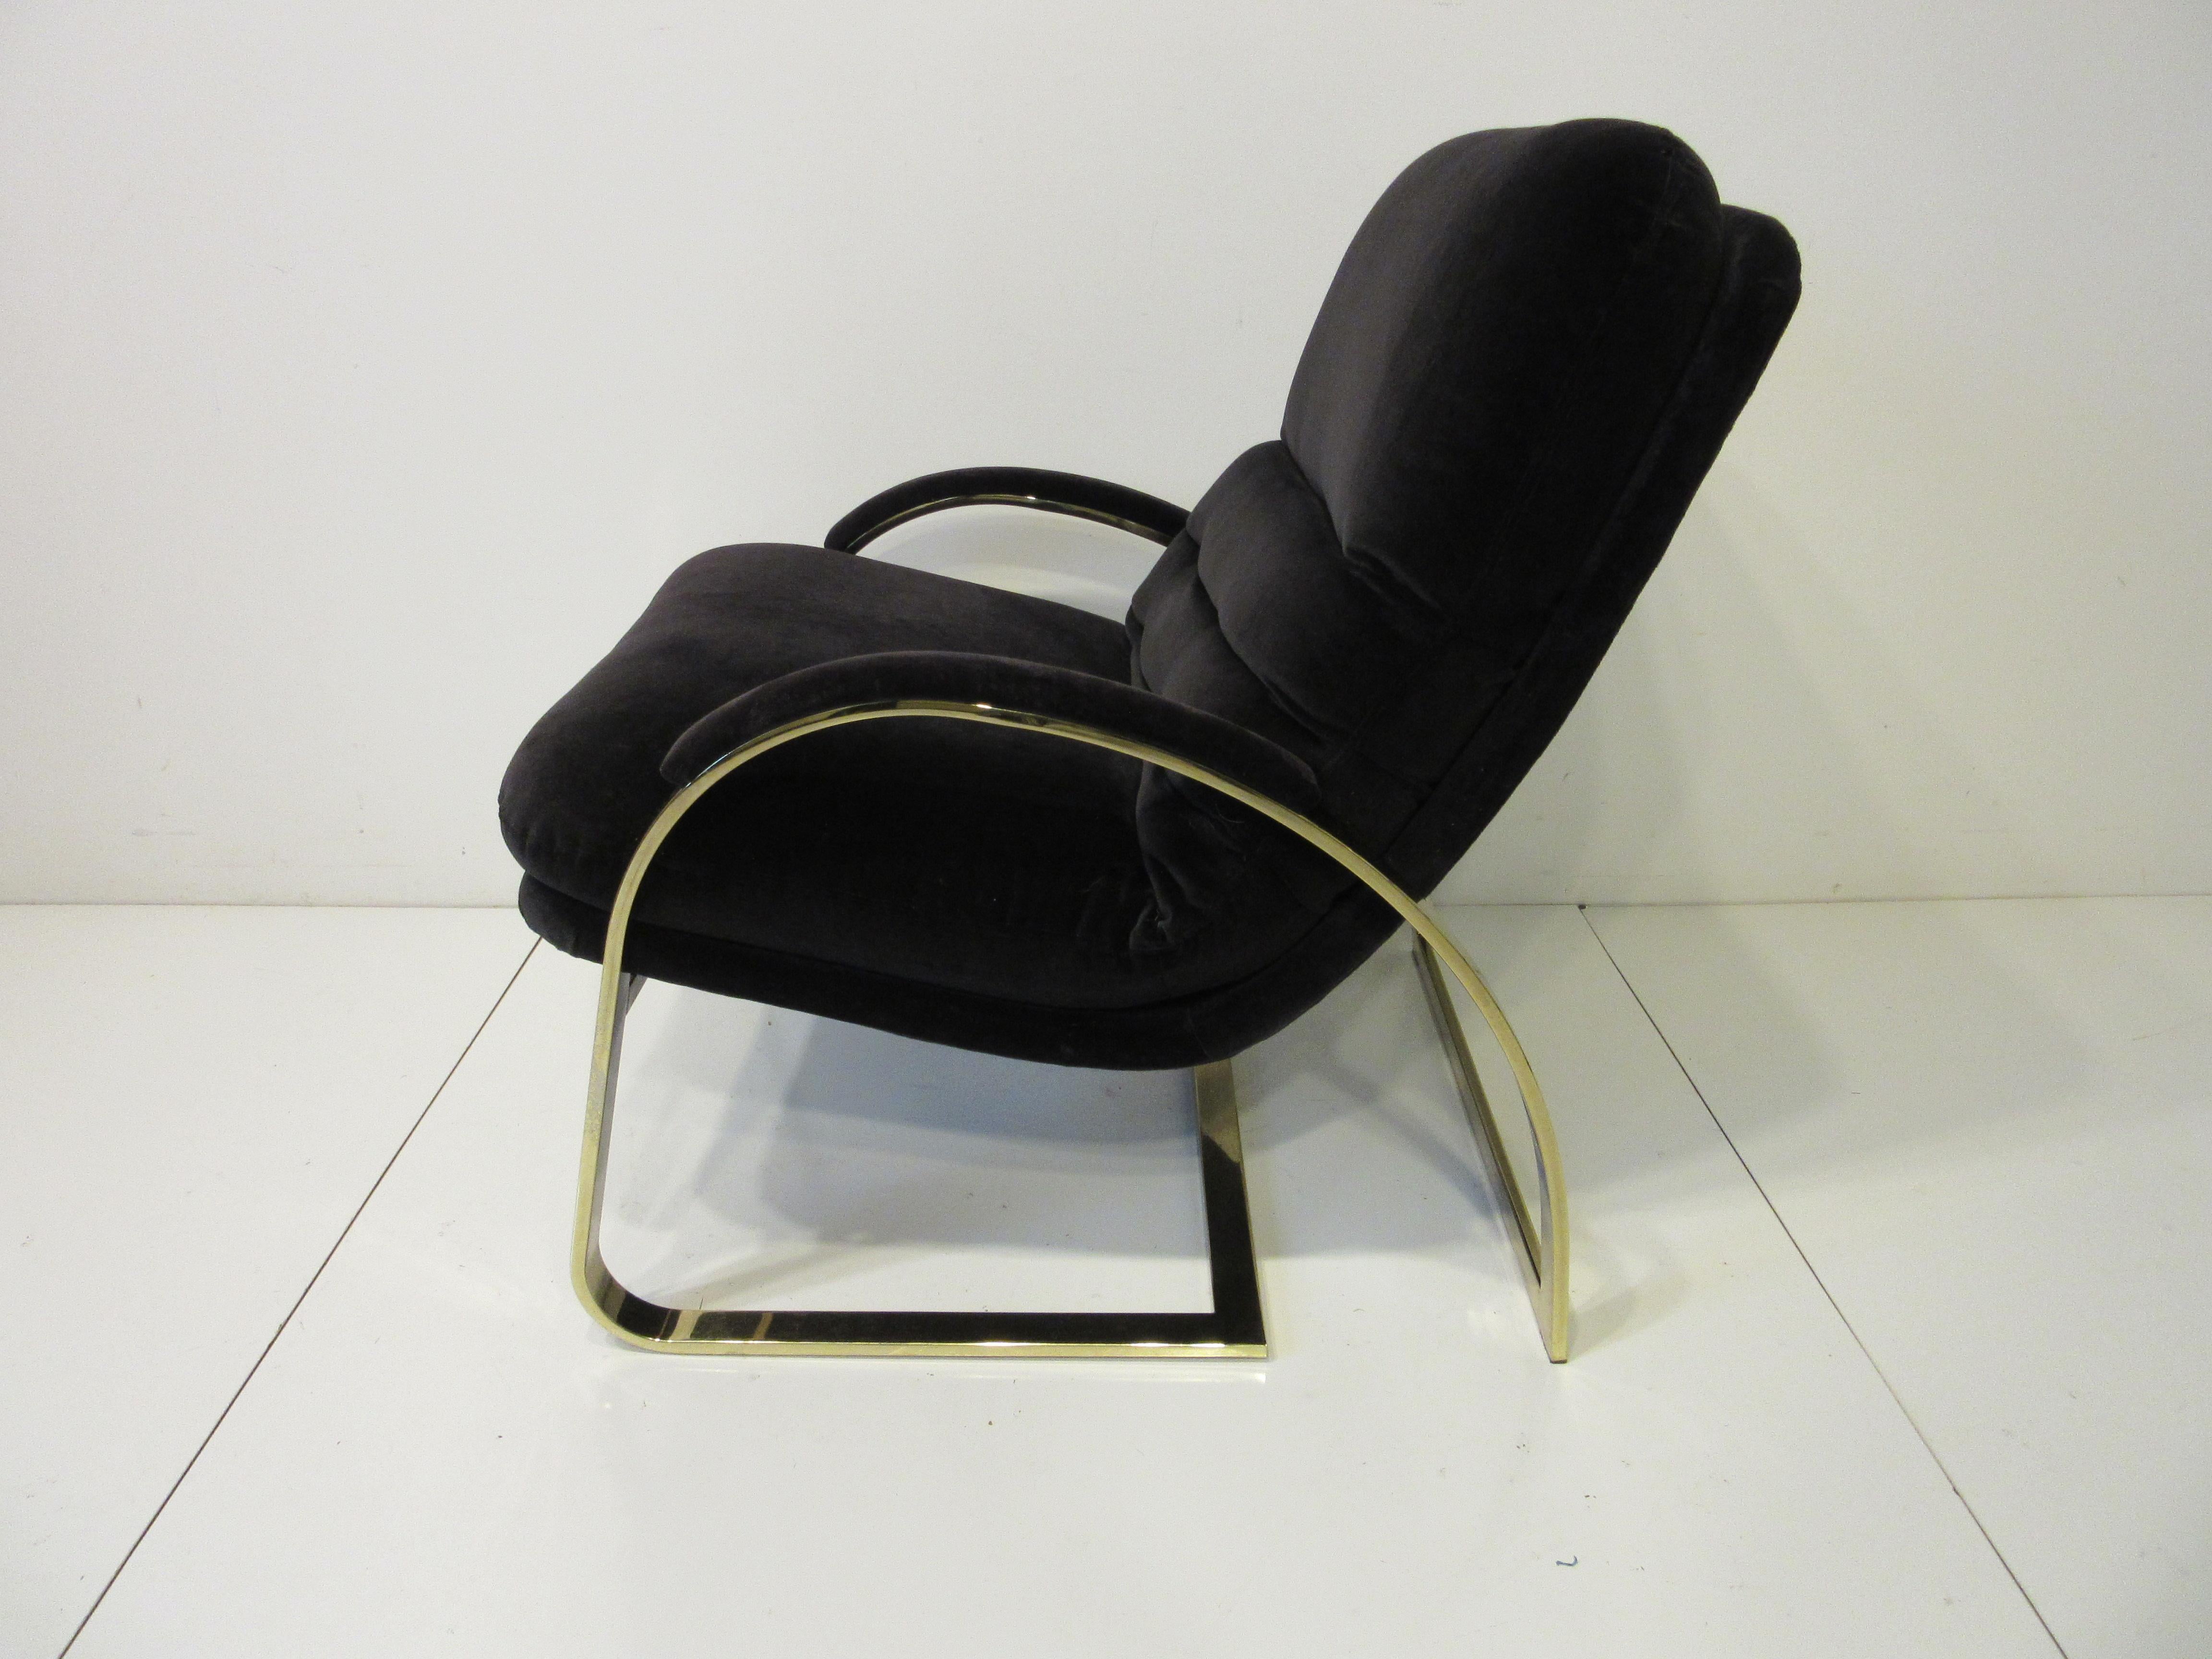 70s style lounge chair